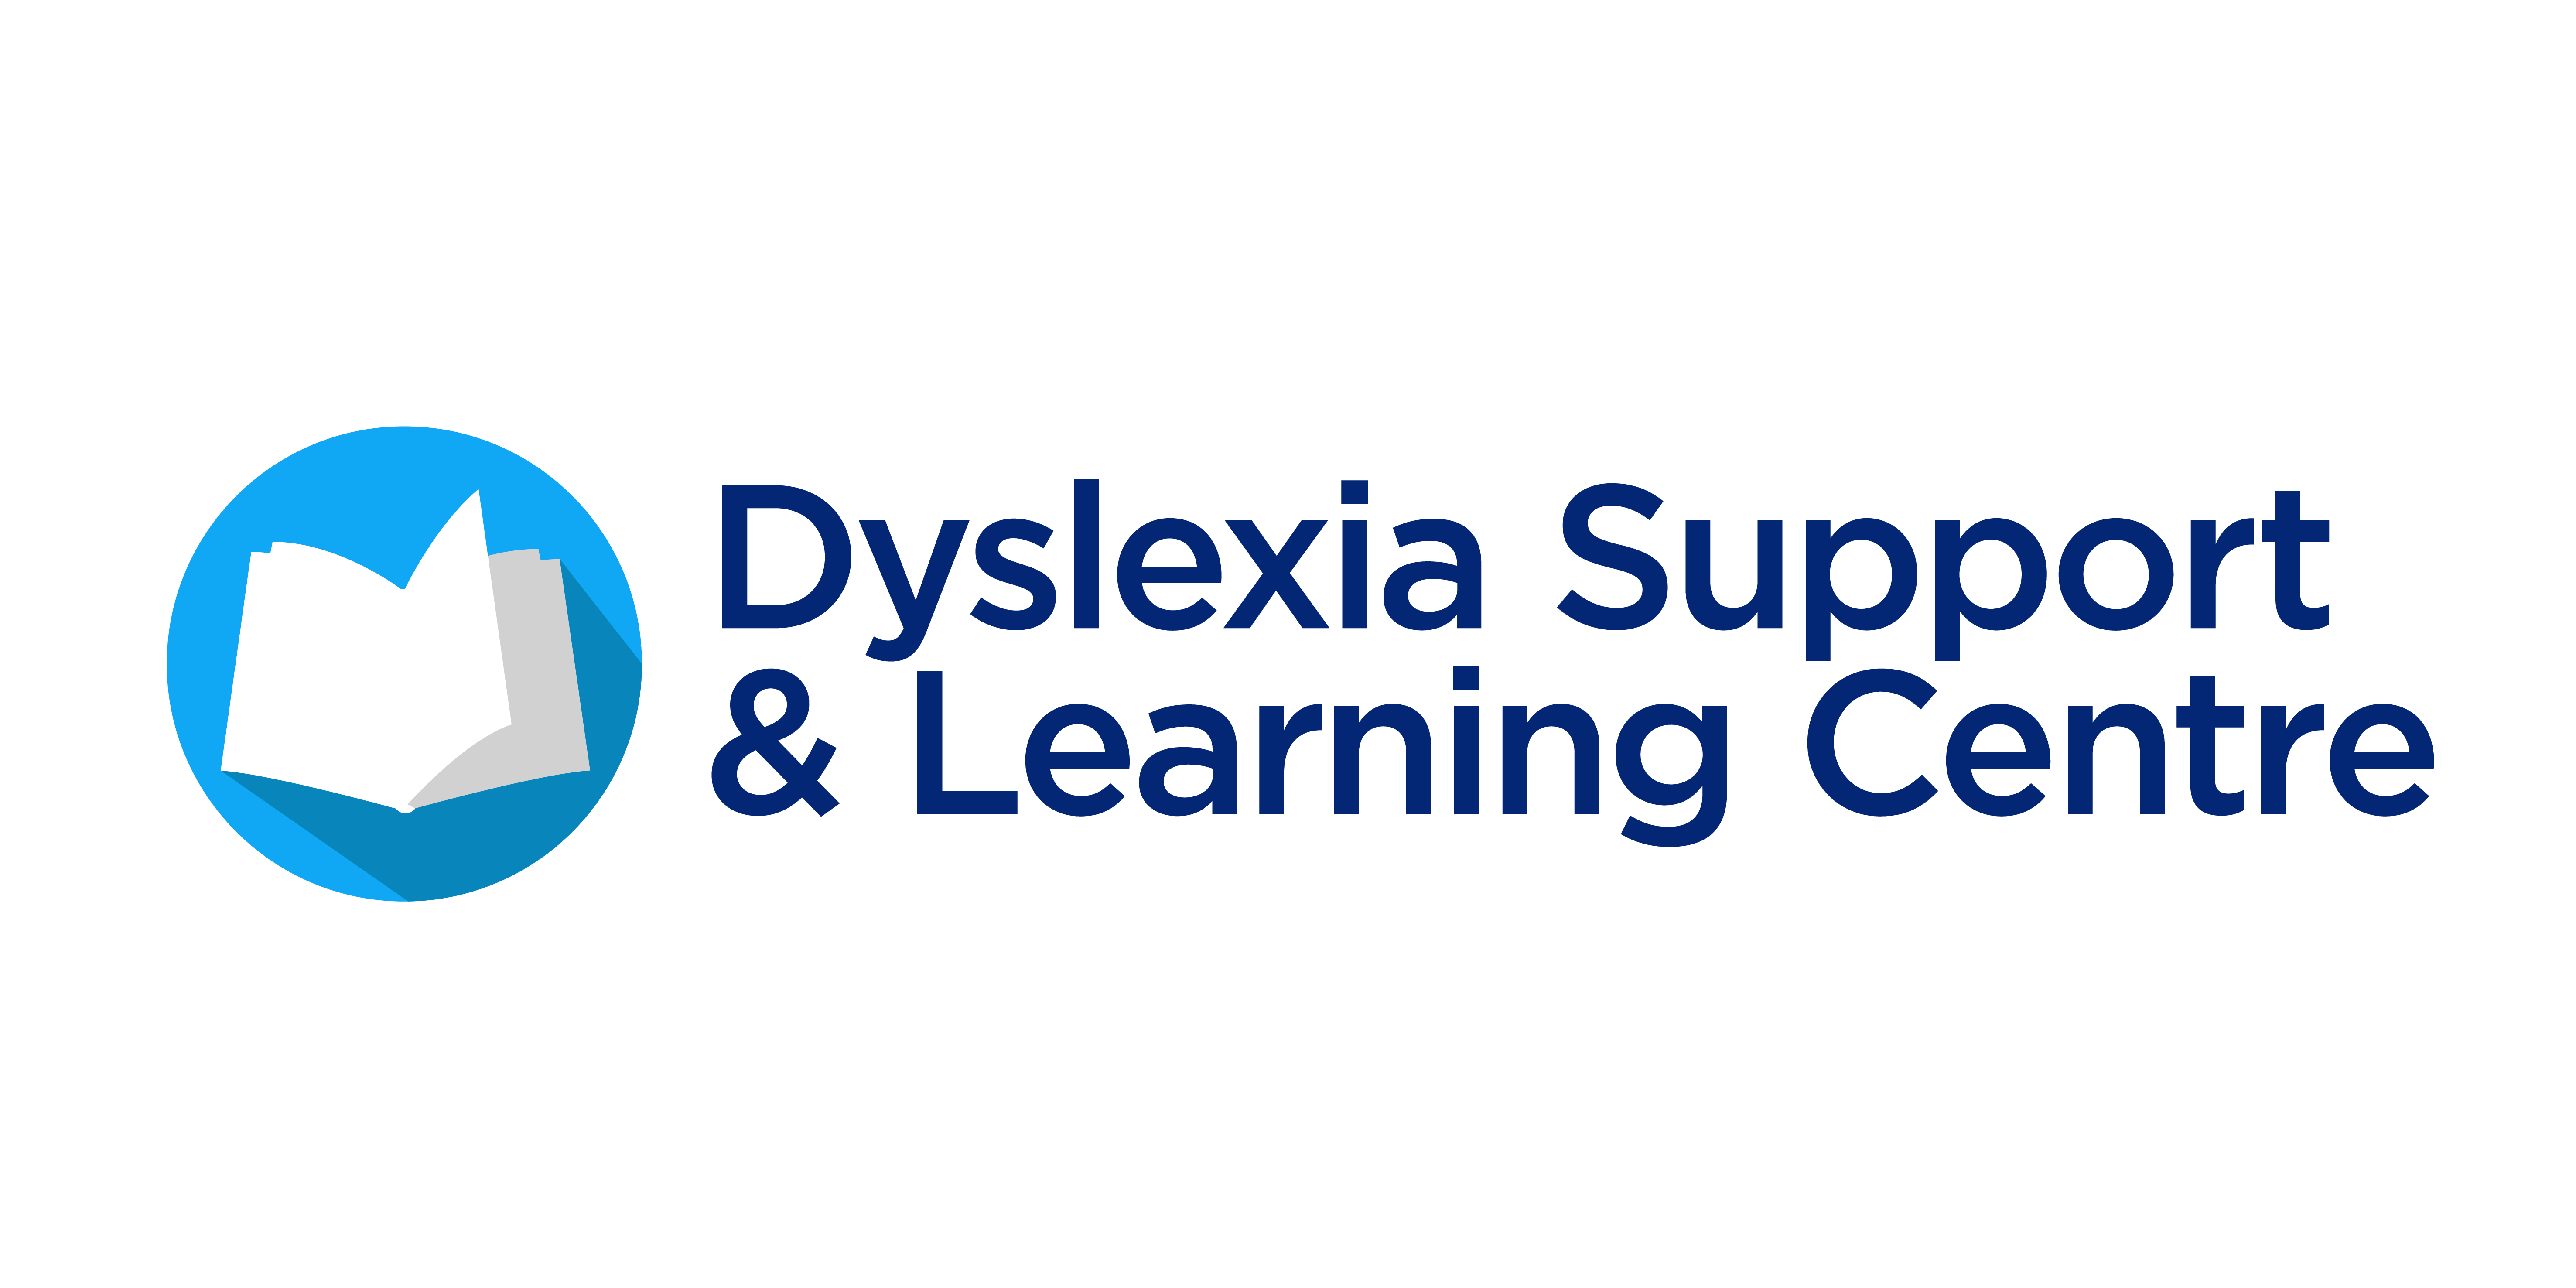 Dyslexia Support and Learning Centre logo